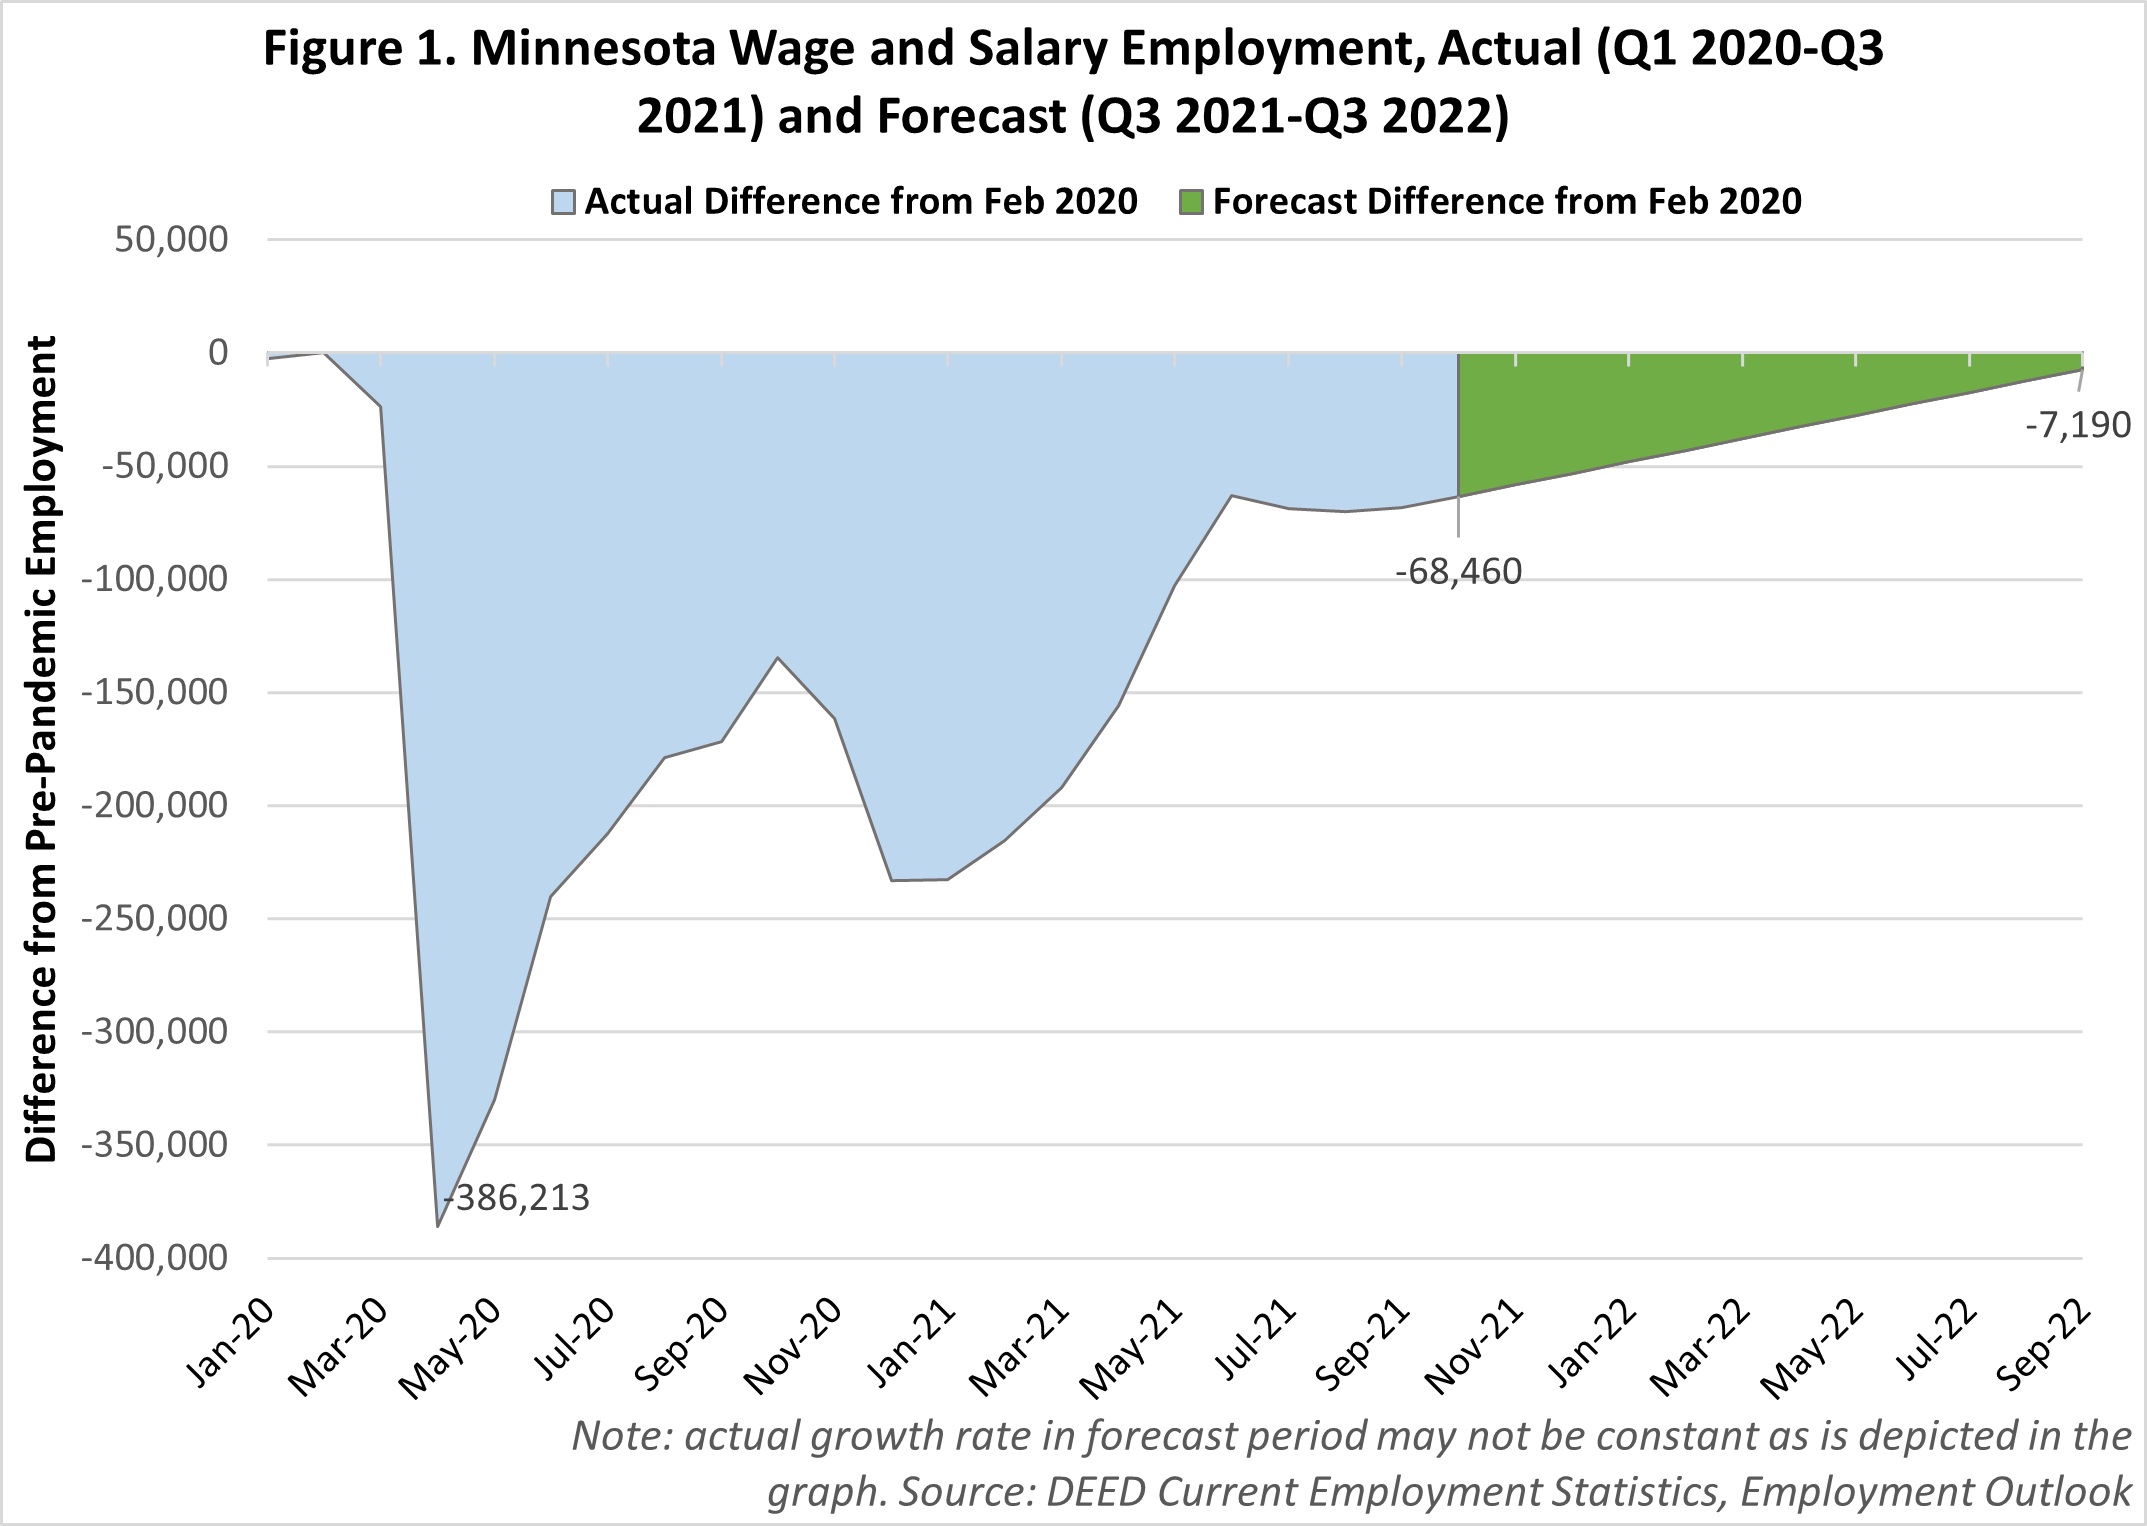 graph showing Minnesota Wage and Salary Employment, Actual (Q1 2020-Q3 2021) and Forecast (Q3 2021-Q3 2022) versus the baseline of February 2020 (pre-pandemic) wage and salary employment. In April 2020, Minnesota reached the lowest point of wage and salary employment versus pre-pandemic wage and salary employment, down 386,213 jobs from February 2020. As of November 2021, Minnesota was down 68,460 jobs from pre-pandemic. Minnesota is forecast to be down 7,190 jobs versus the pre-pandemic baseline as of September 2022.